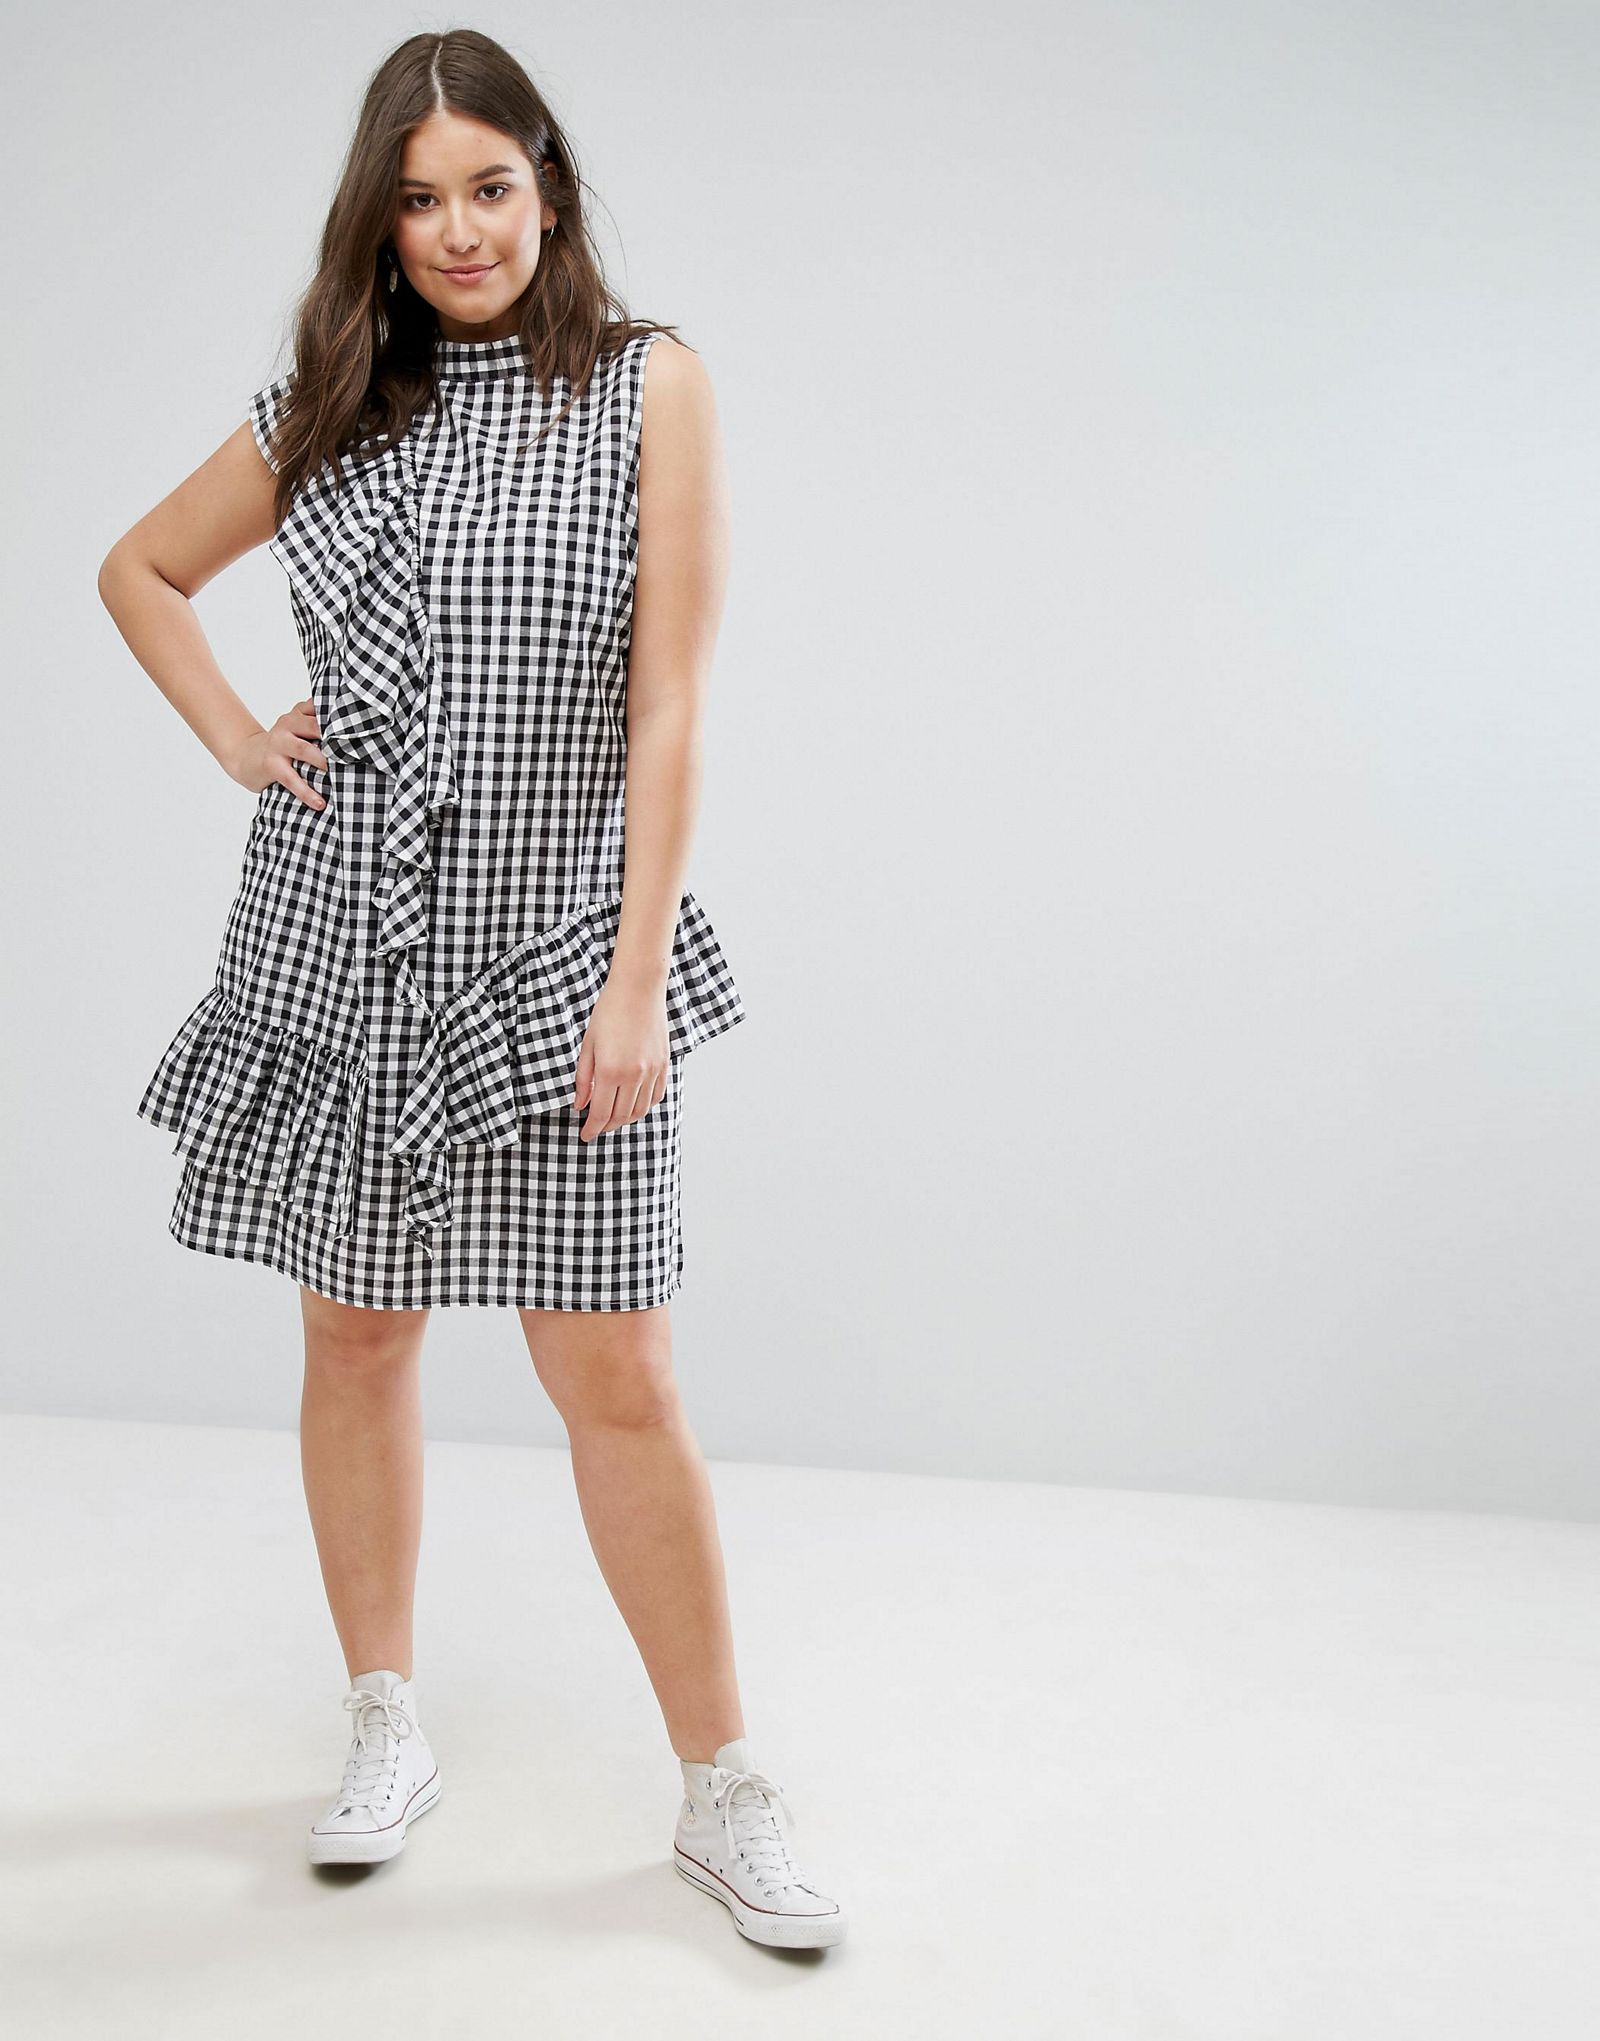 ASOS CURVE Gingham Dress with Frill